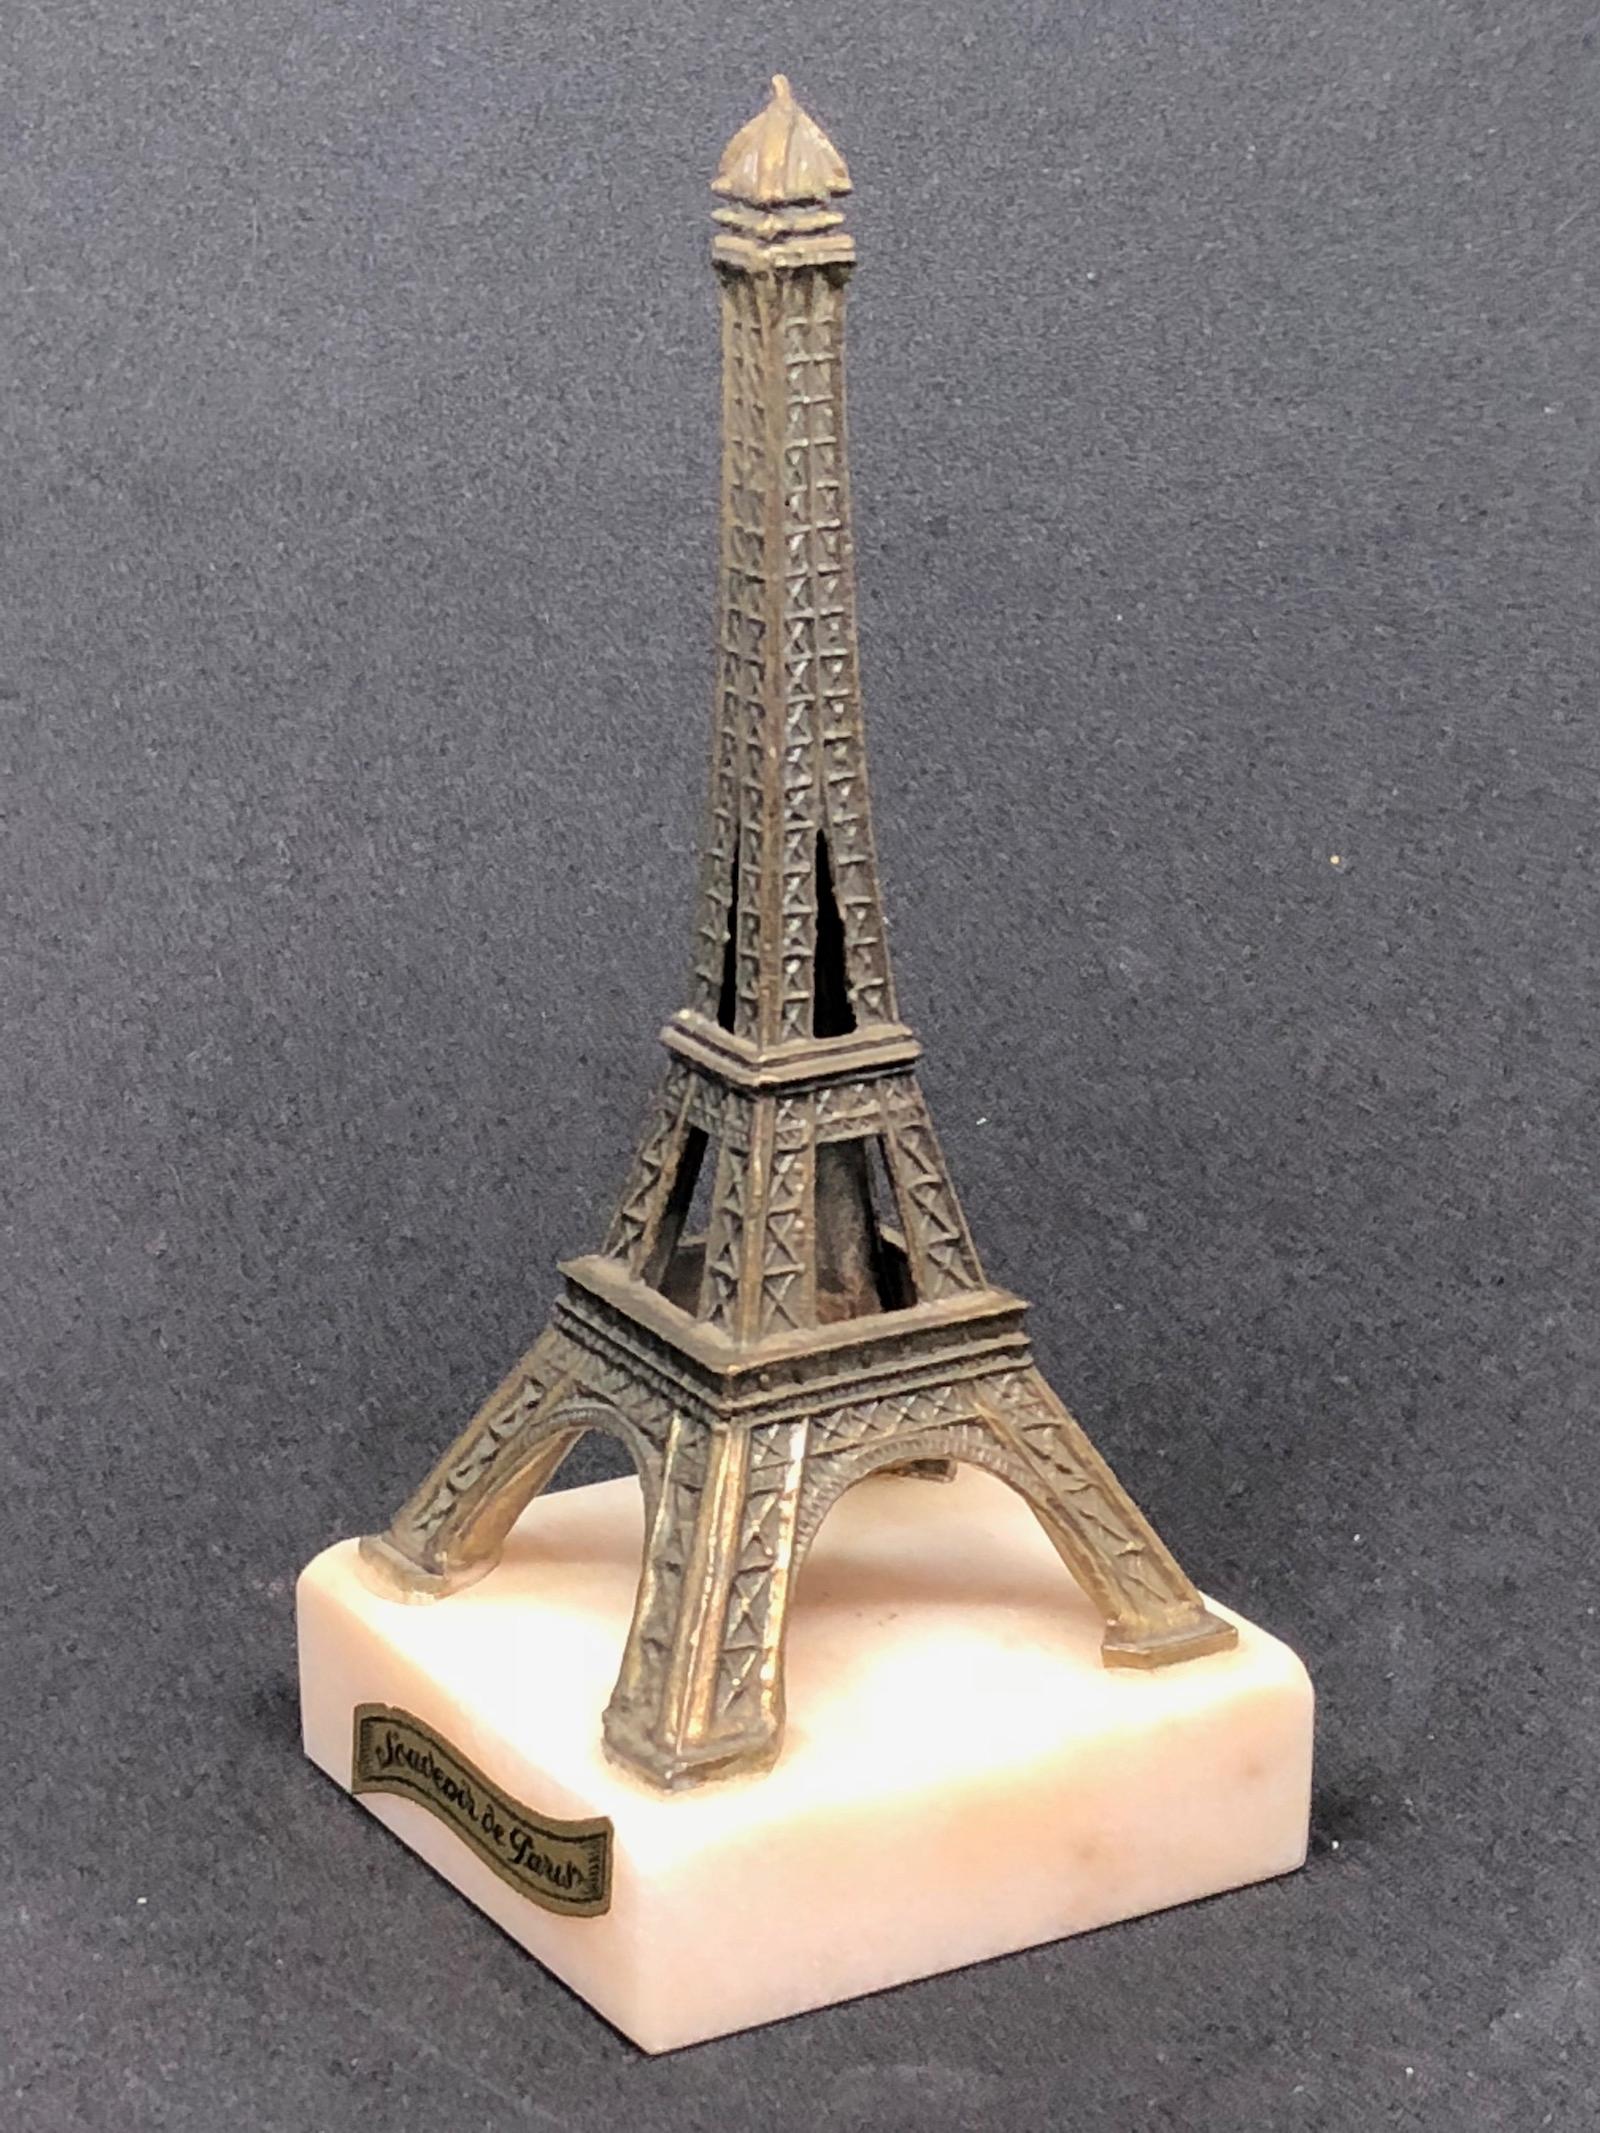 Metal Eiffel Tower French 1930s Souvenir Building Architectural Model on Marble Base